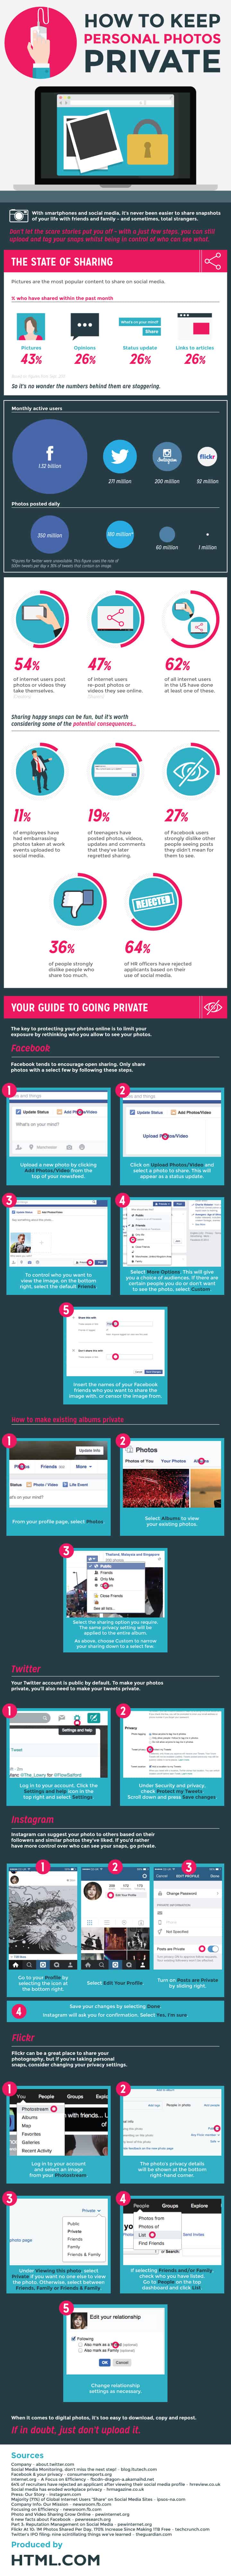 How to keep personal photos private infographic